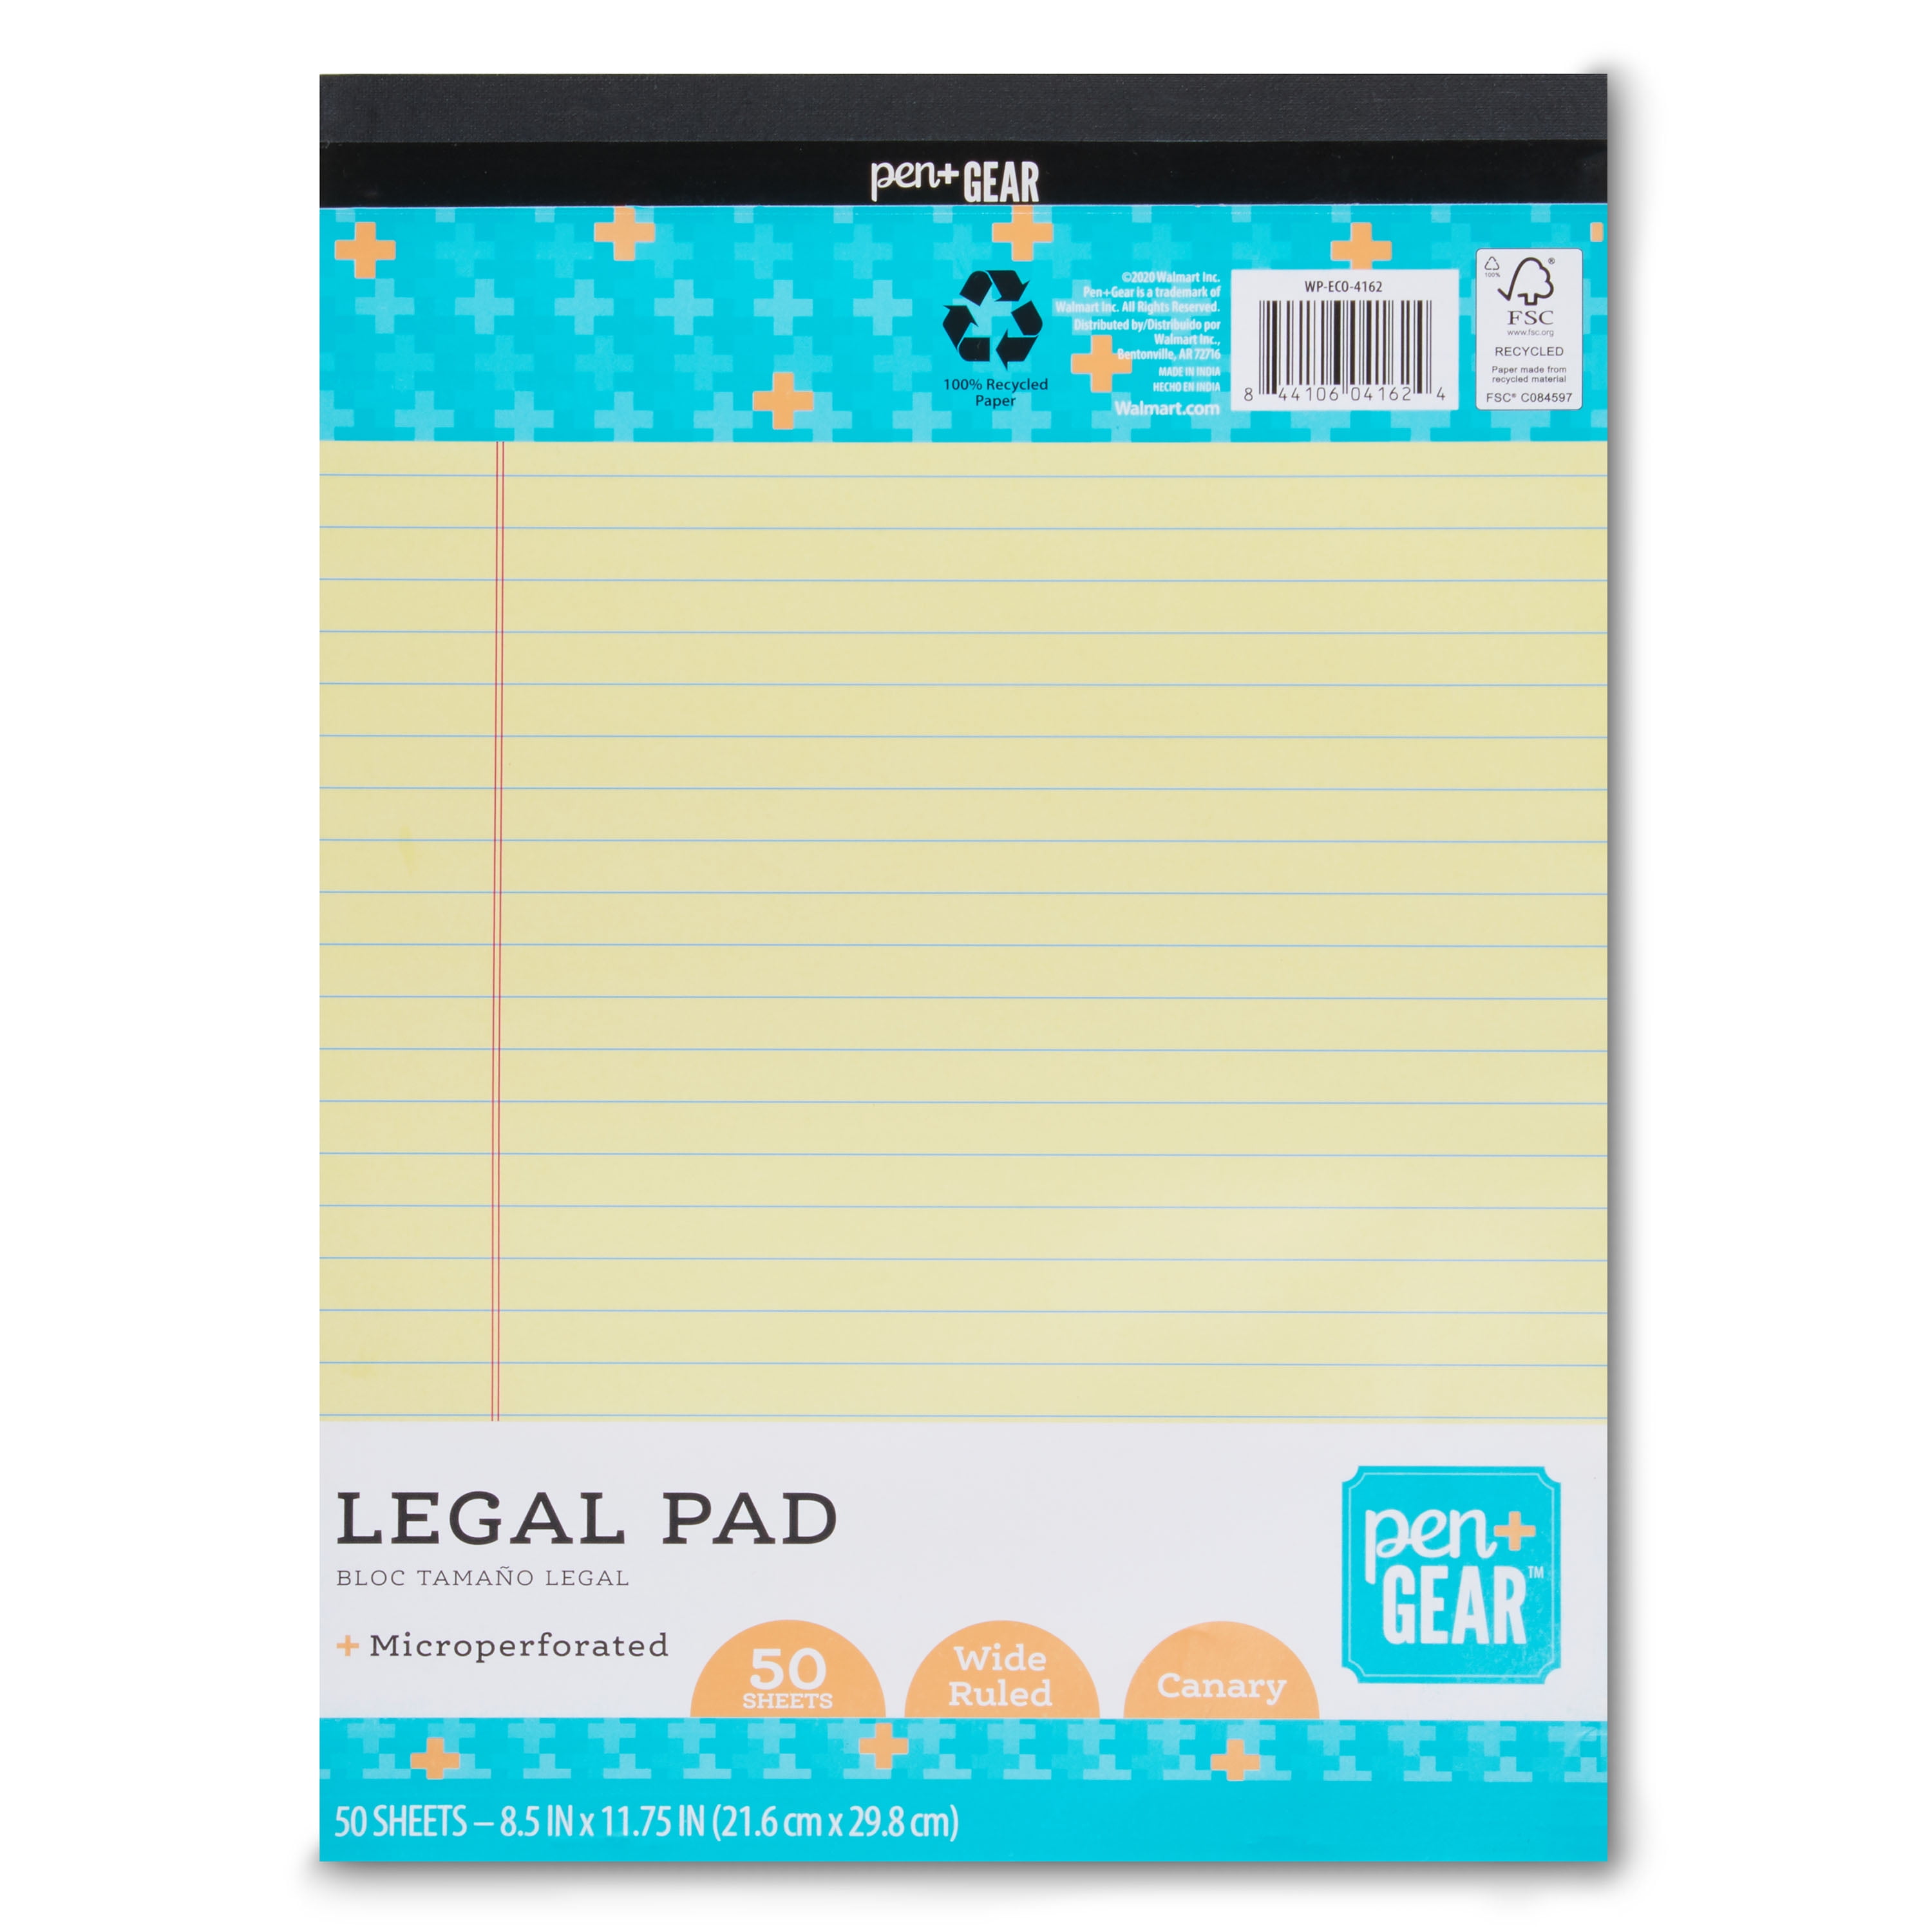 Professional Office Micro perforated Writing Pad Mintra Office Legal Pads - DOUBLE PAD 2PK, CANARY, 8.5in x 11in, WIDE RULED Notebook Paper for School College - 100 Sheets per Notepad